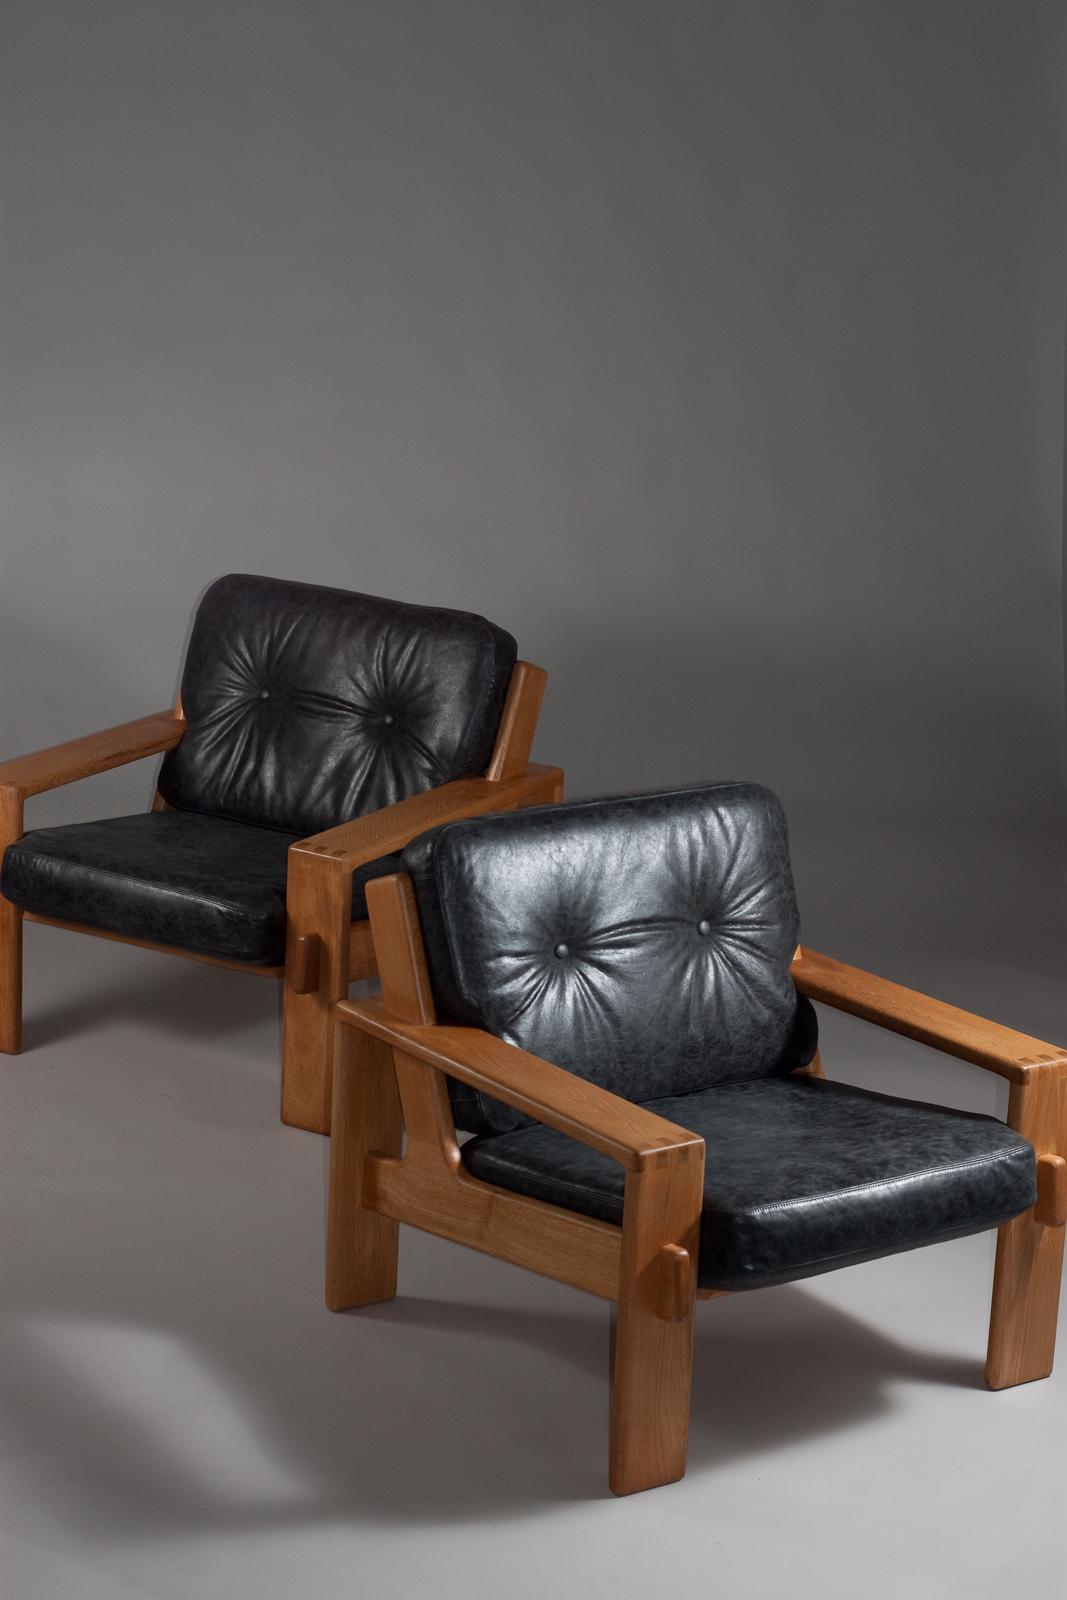 Introducing a timeless pair of 1960's oak Bonanza lounge chairs by Esko Pajamies, perfect for adding a touch of retro style to any living space. Crafted with a sleek and minimalist design, these chairs feature a striking oak frame and comfortable